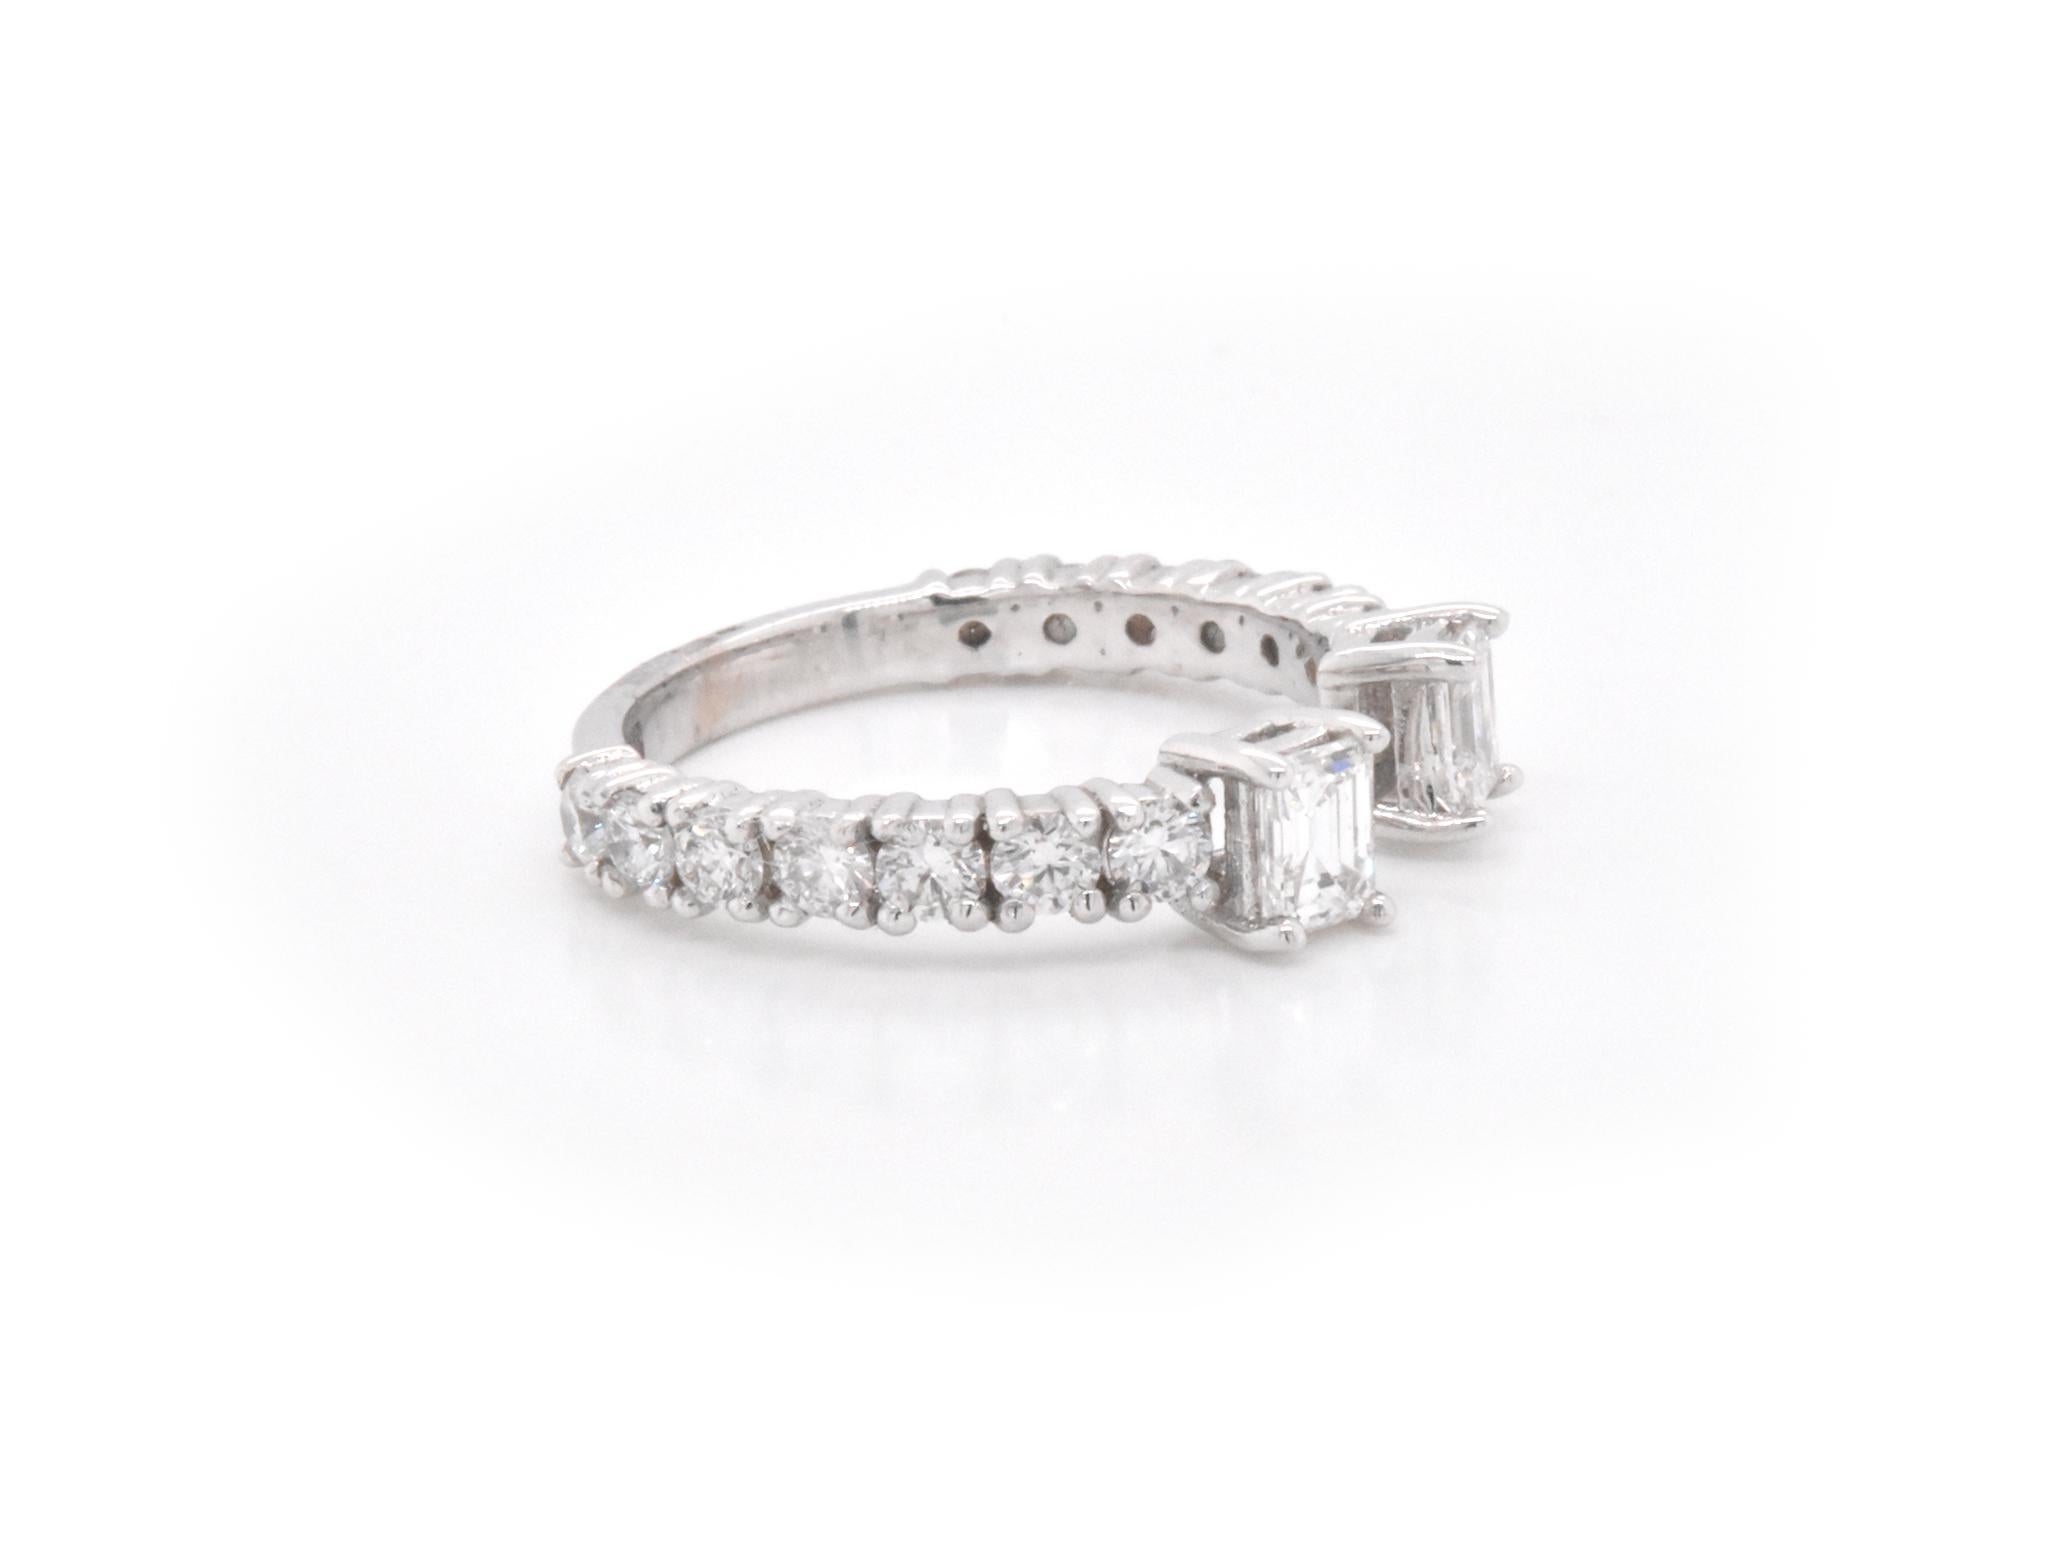 Designer: The Estate Watch and Jewelry Company
Material: 14k white gold
Diamonds: 2 emerald cut diamonds = 0.62cttw
Color: G
Clarity: VS1
Mounting Diamonds: 14 round brilliant cuts = 0.86cttw
Ring size: 7 (please allow two additional shipping days